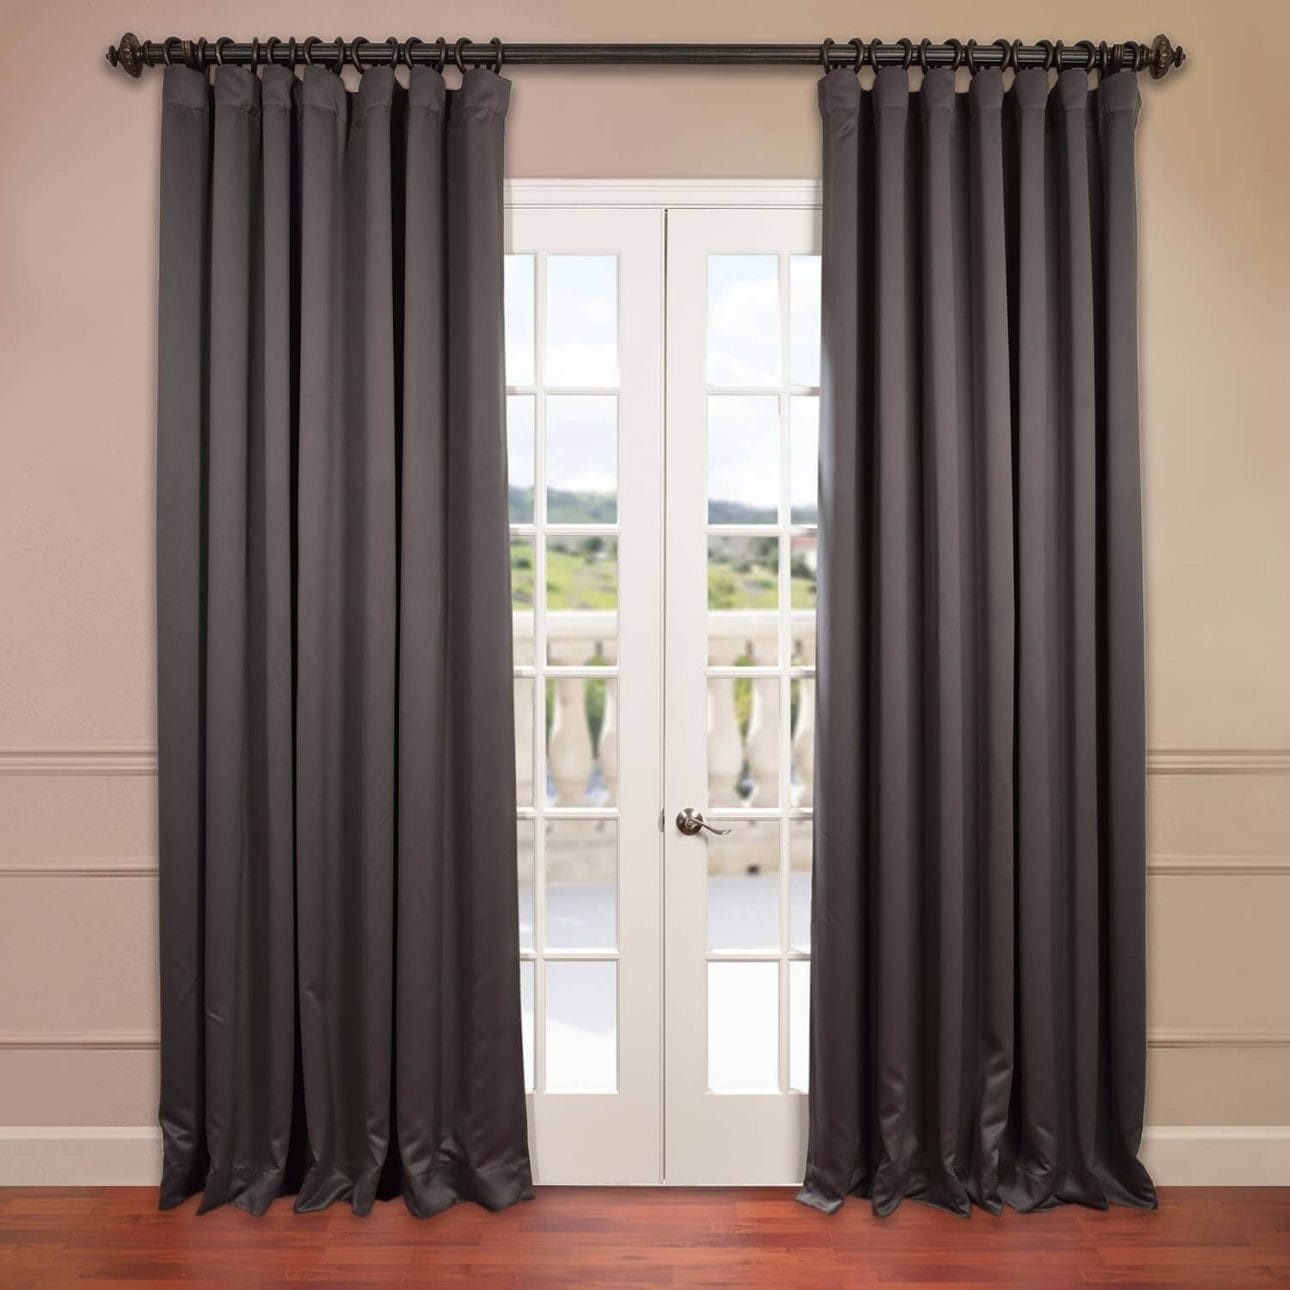  types of curtains to make